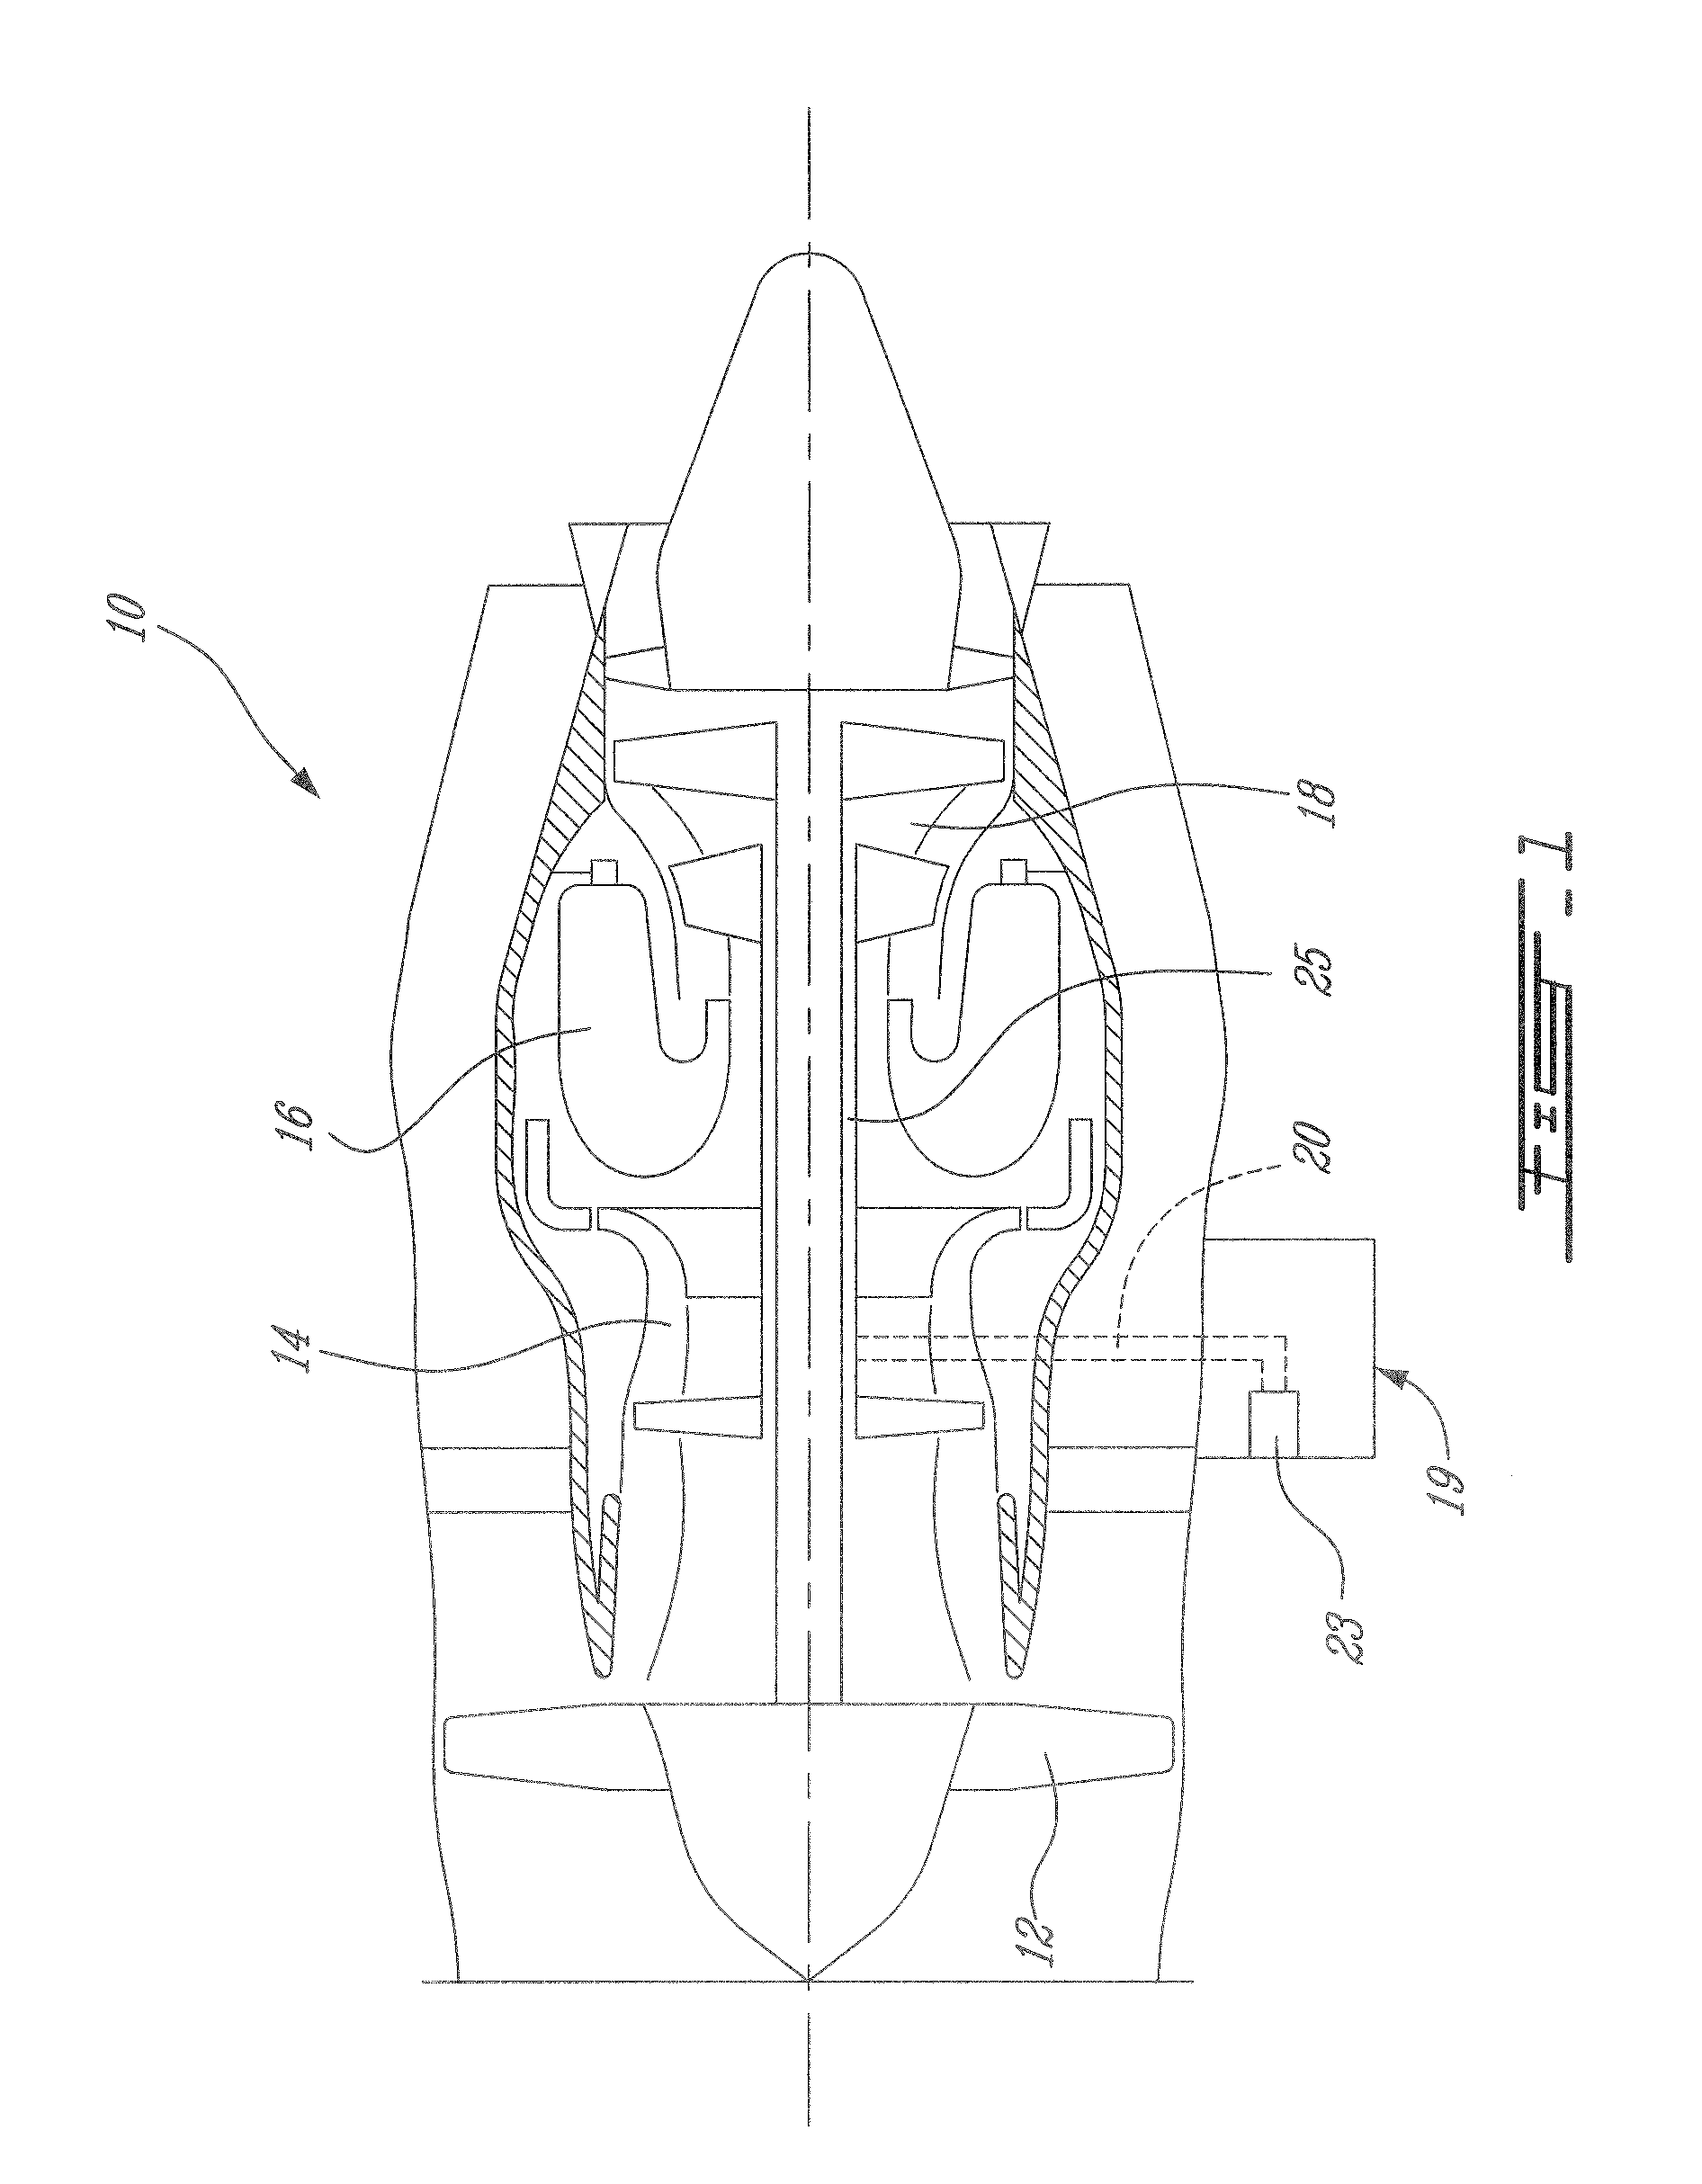 Torque transmission for an aircraft engine